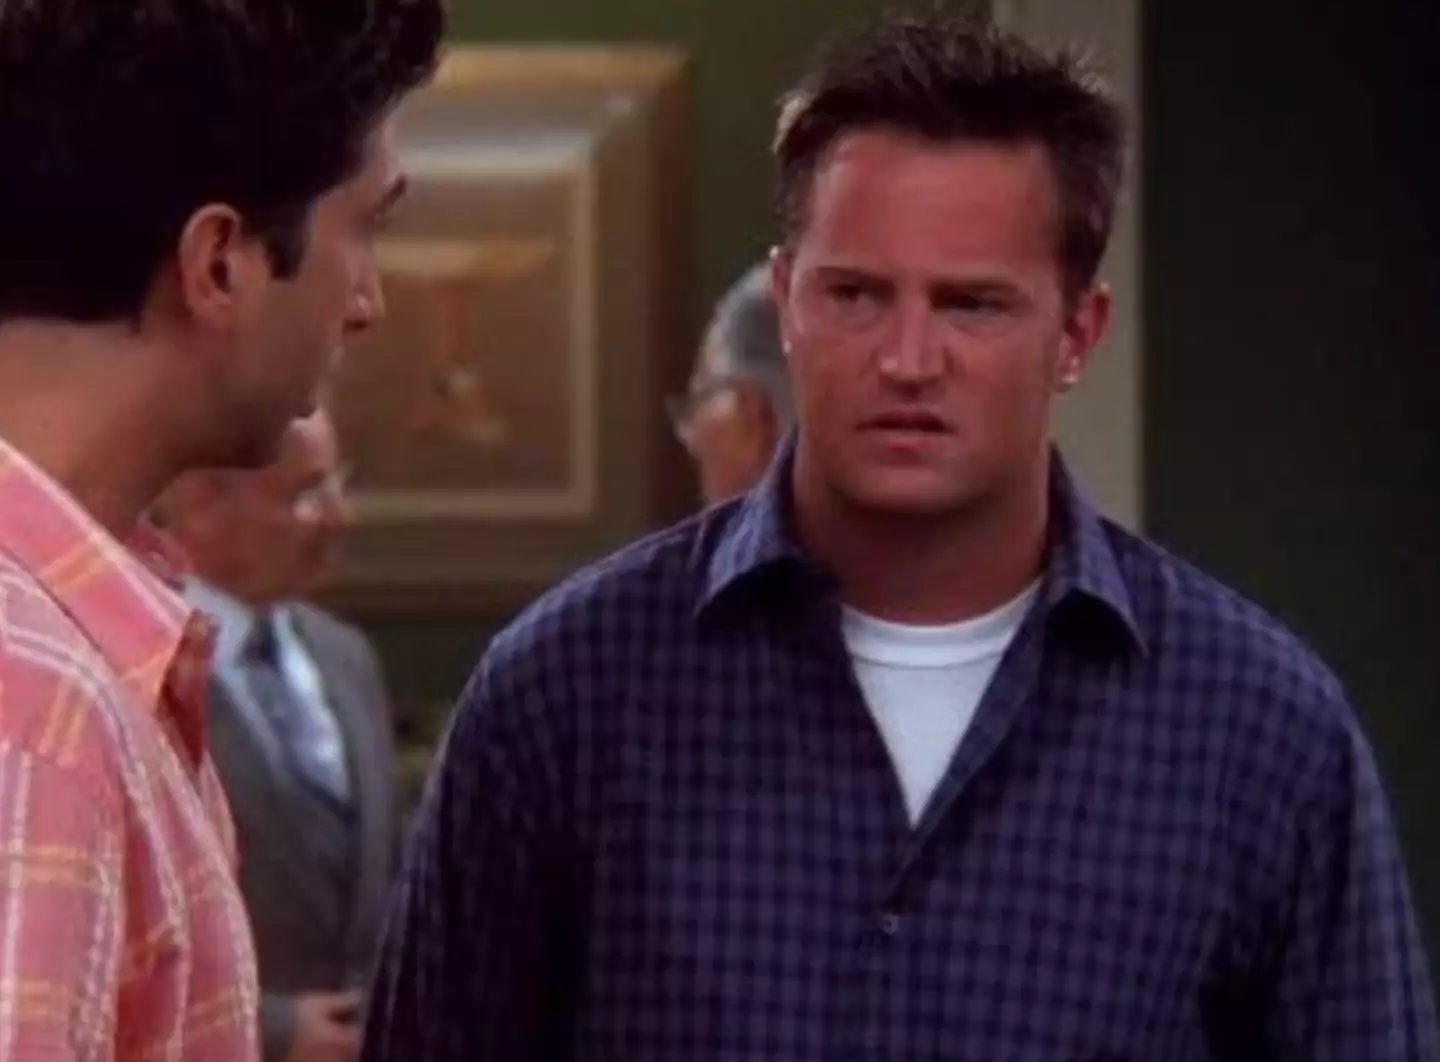 Perry starred as Chandler for 10 years in Friends.